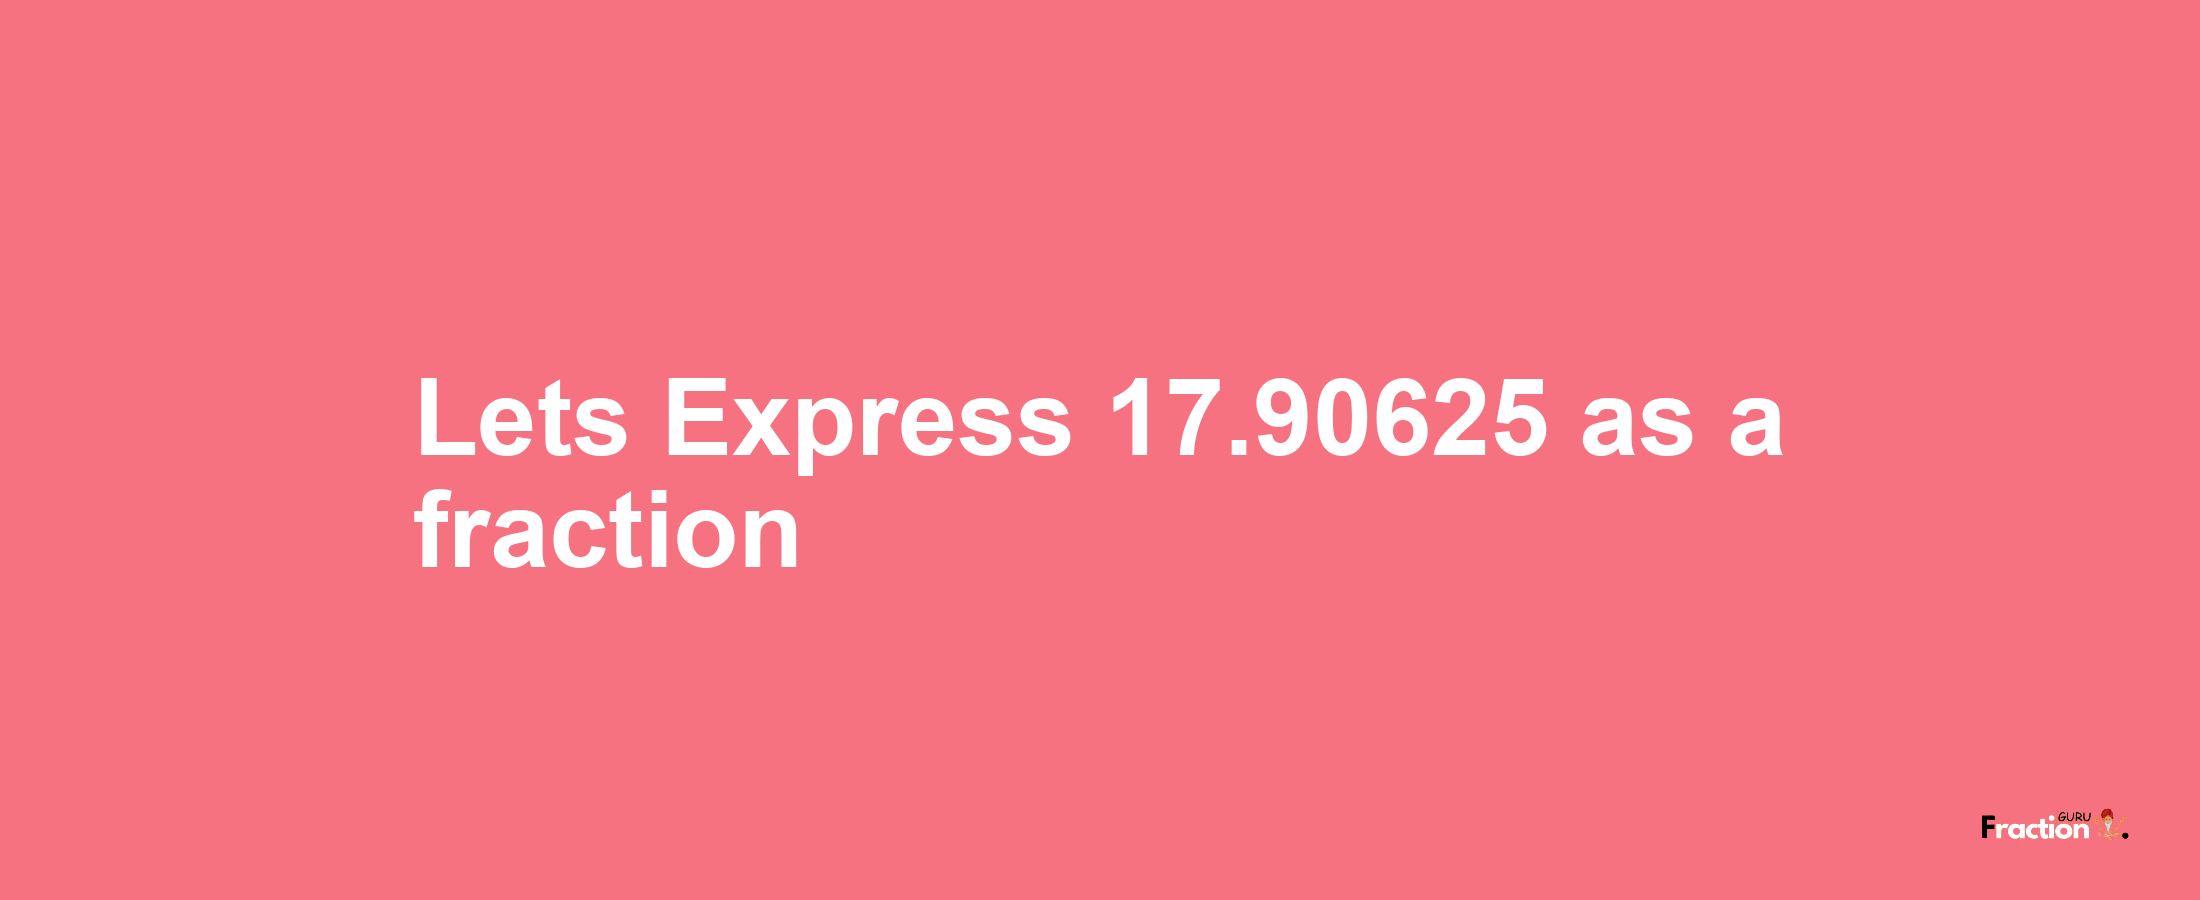 Lets Express 17.90625 as afraction